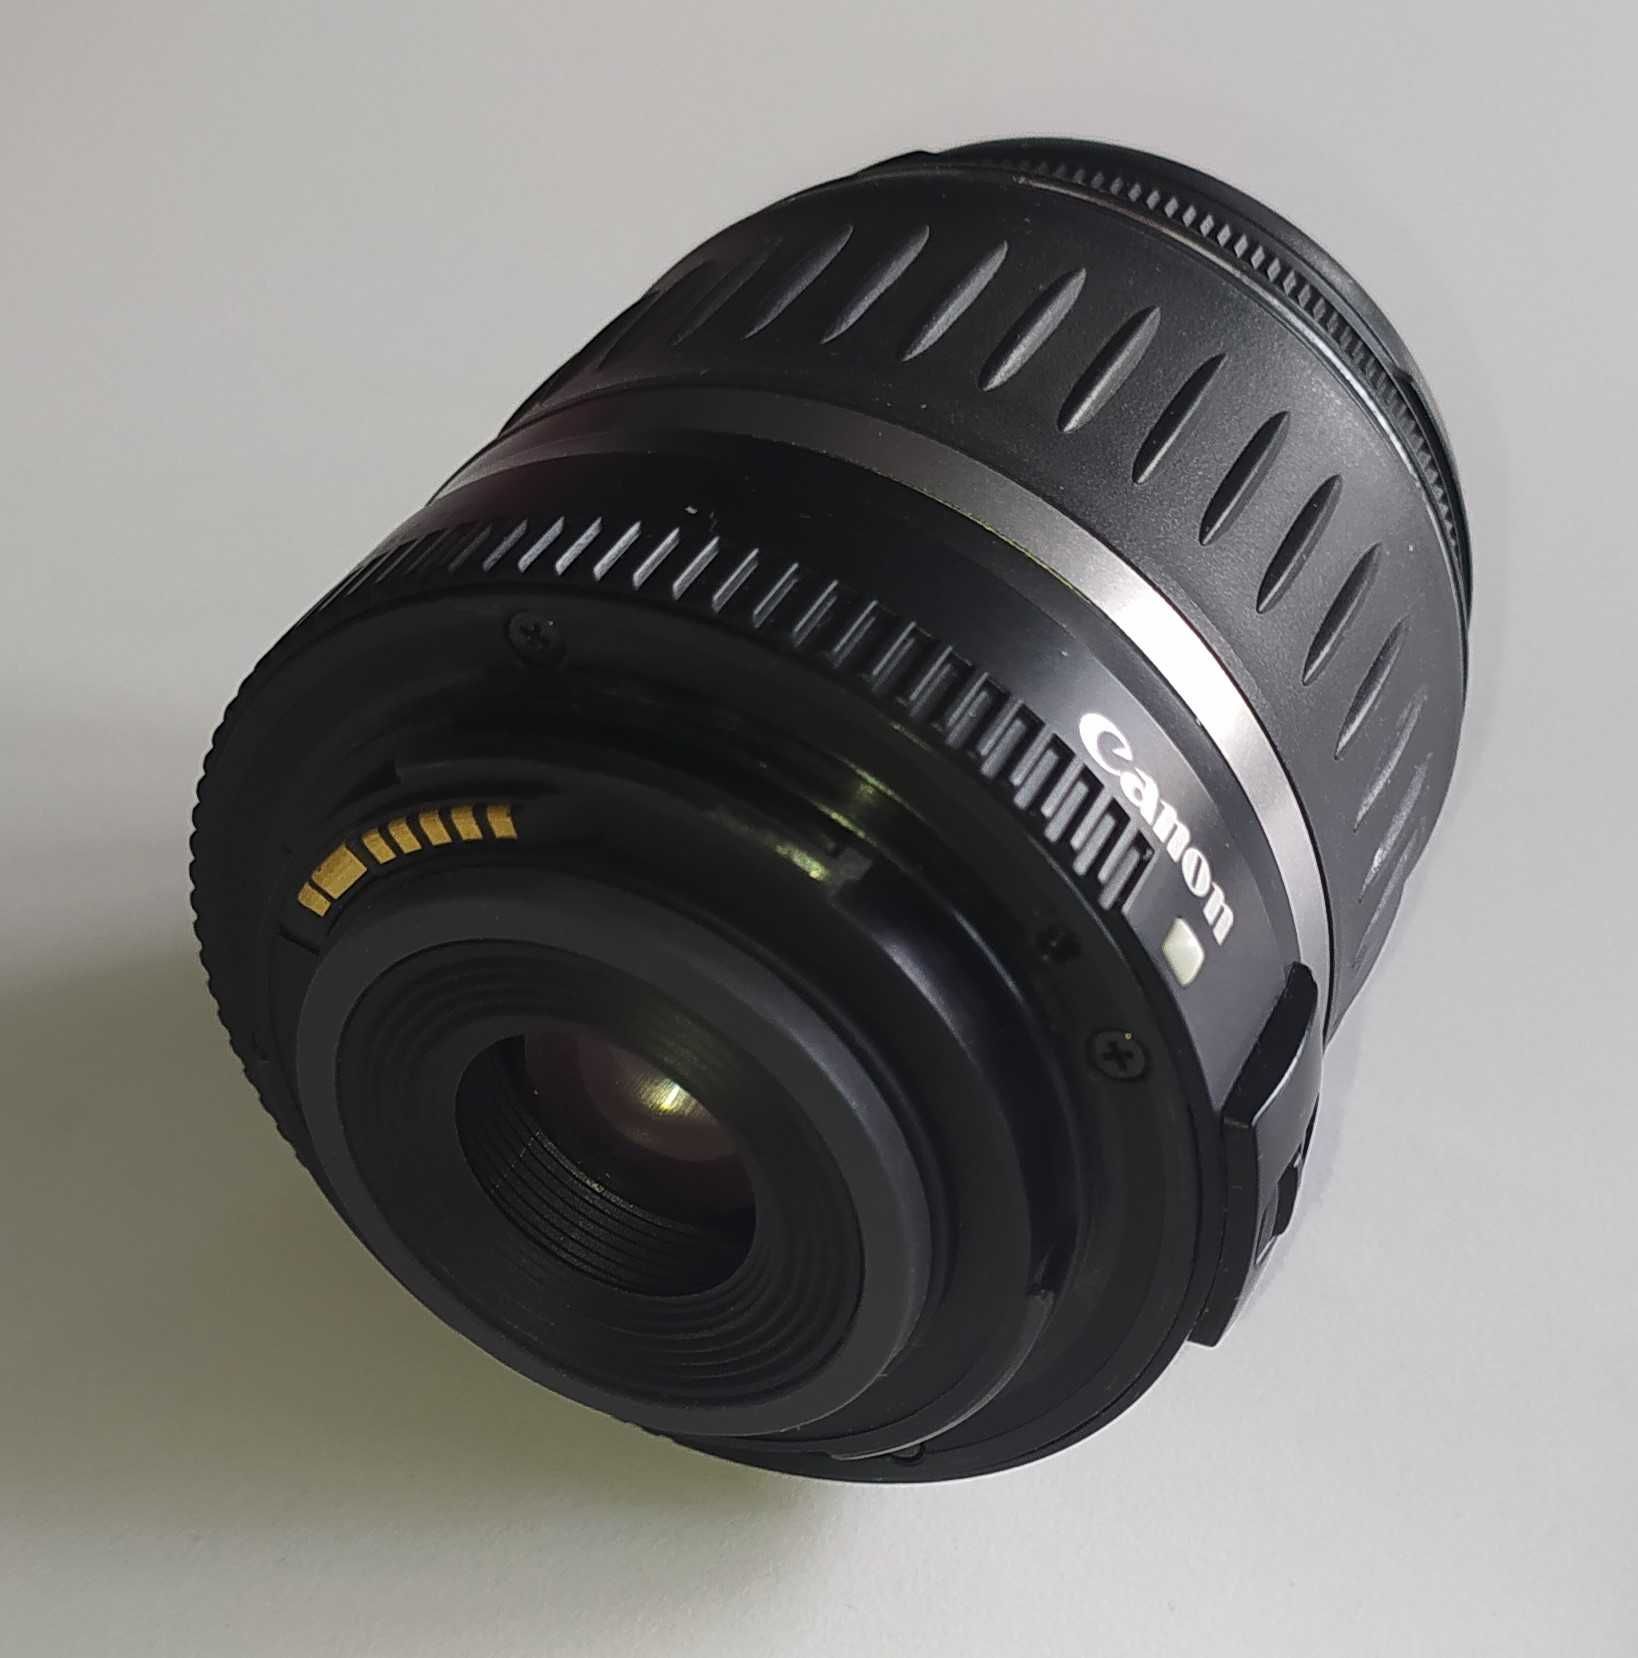 Canon EFS 18-55 mm